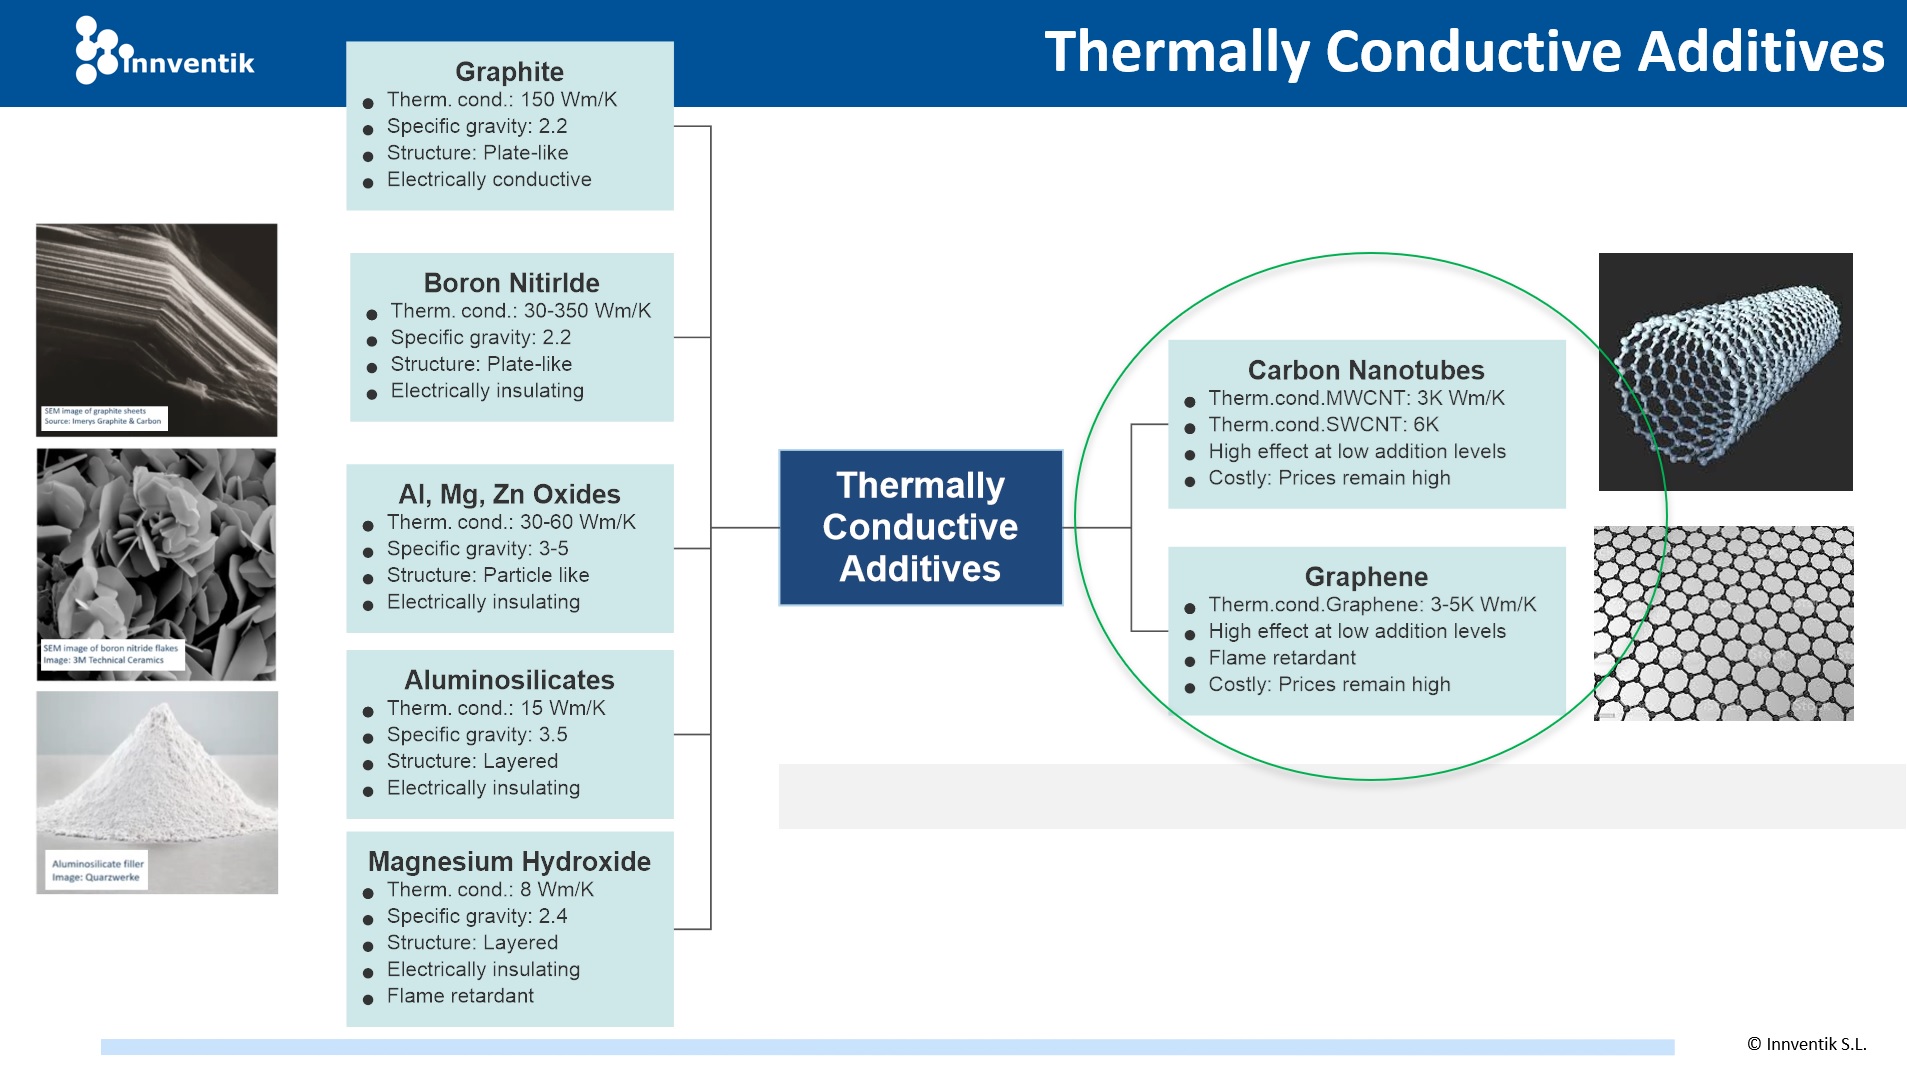 Thermally Conductive Additives